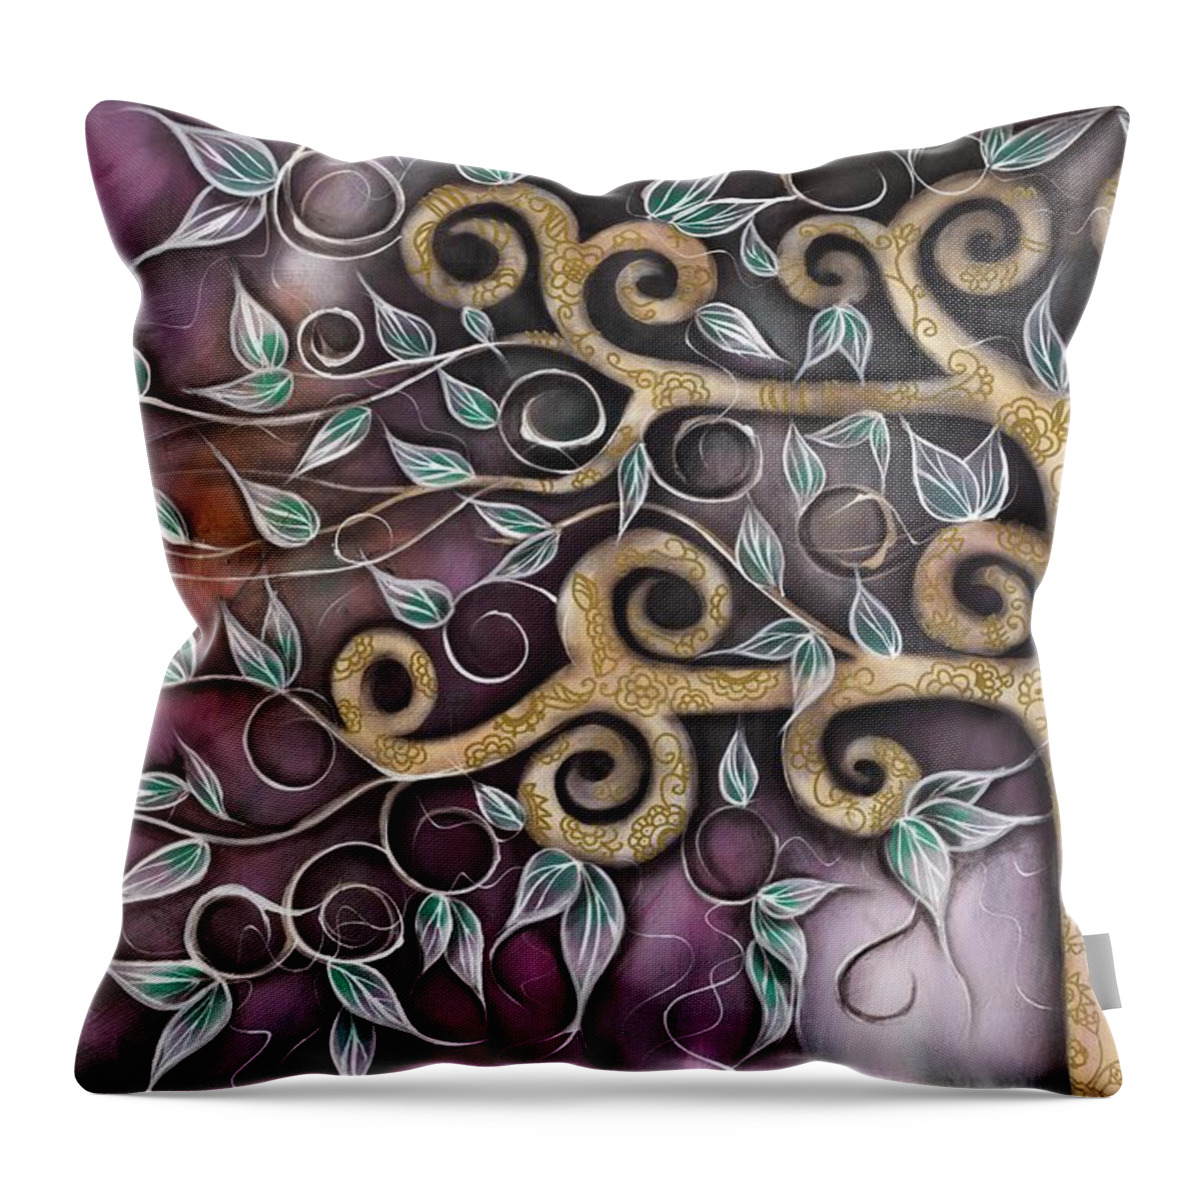 Whimsical Throw Pillow featuring the painting My Aurora by Abril Andrade